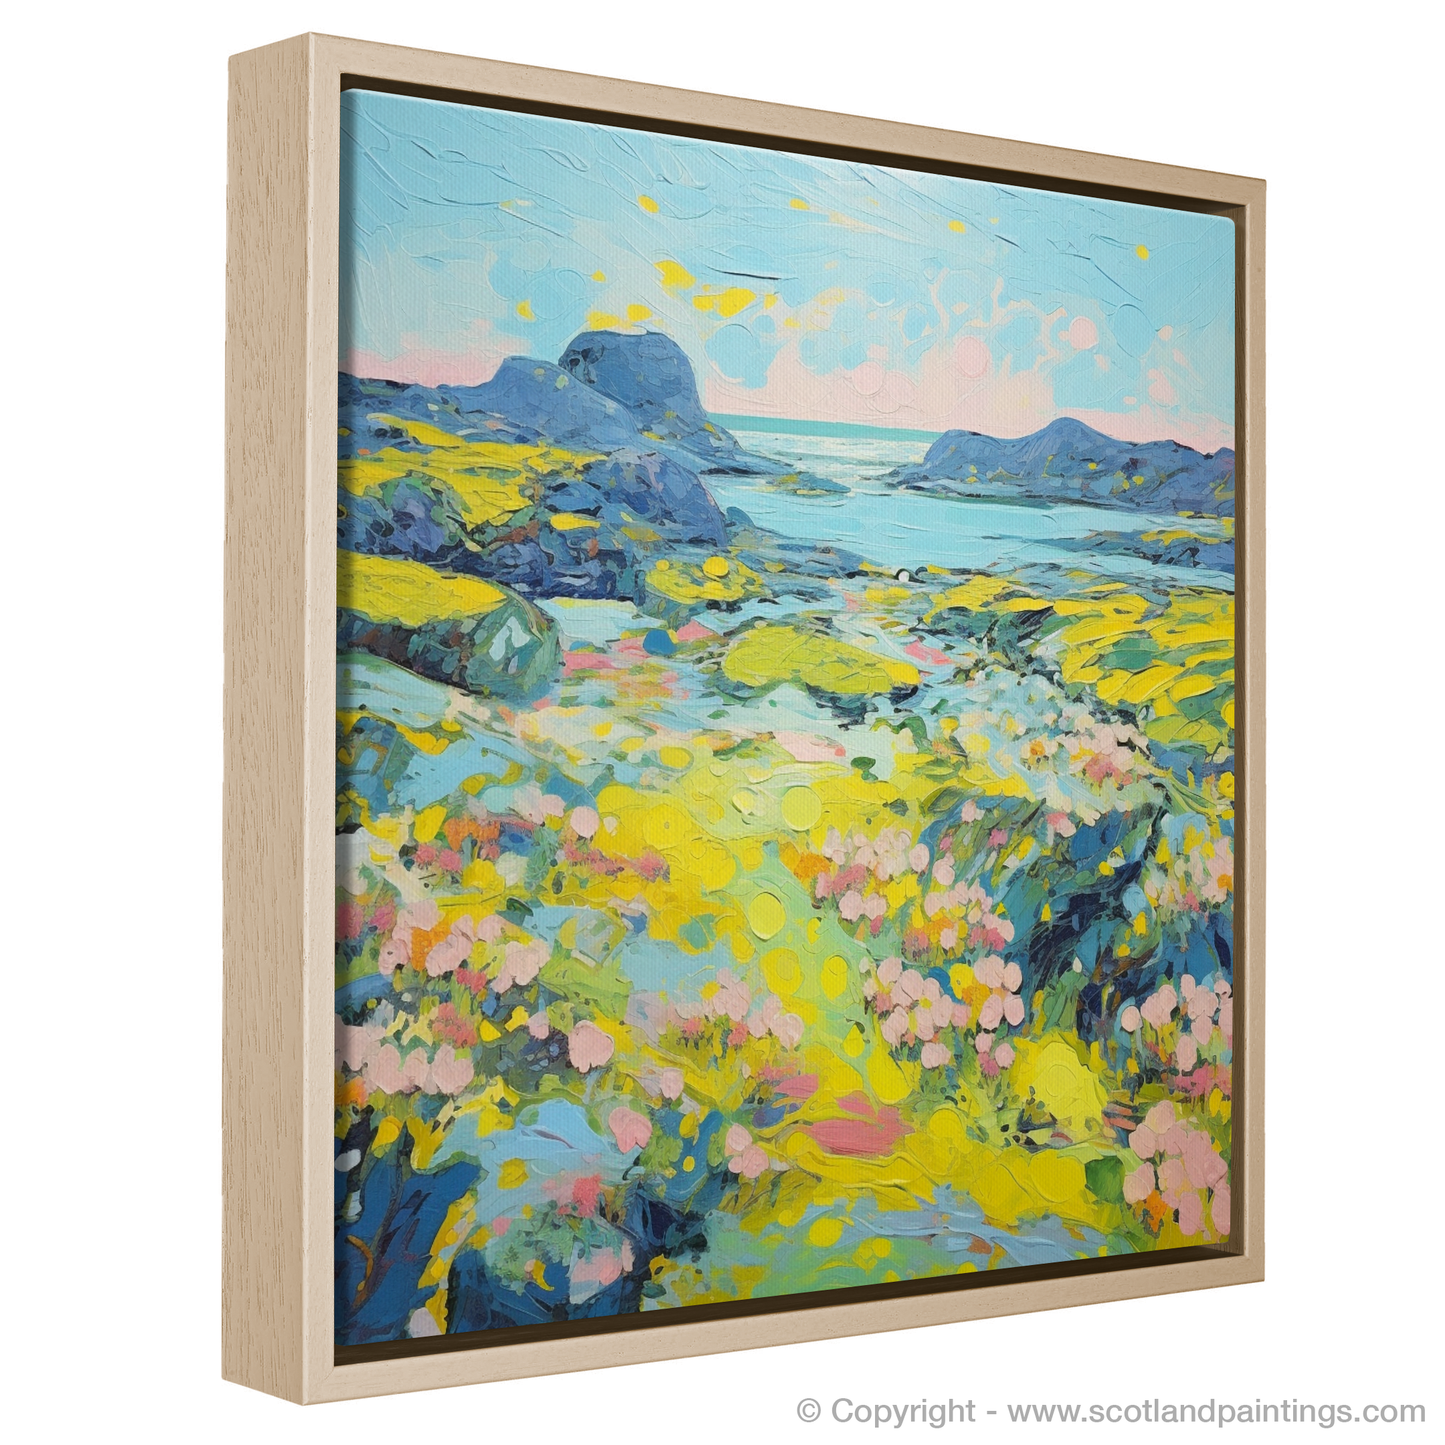 Painting and Art Print of Isle of Lewis, Outer Hebrides in summer entitled "Hebridean Summer Symphony".